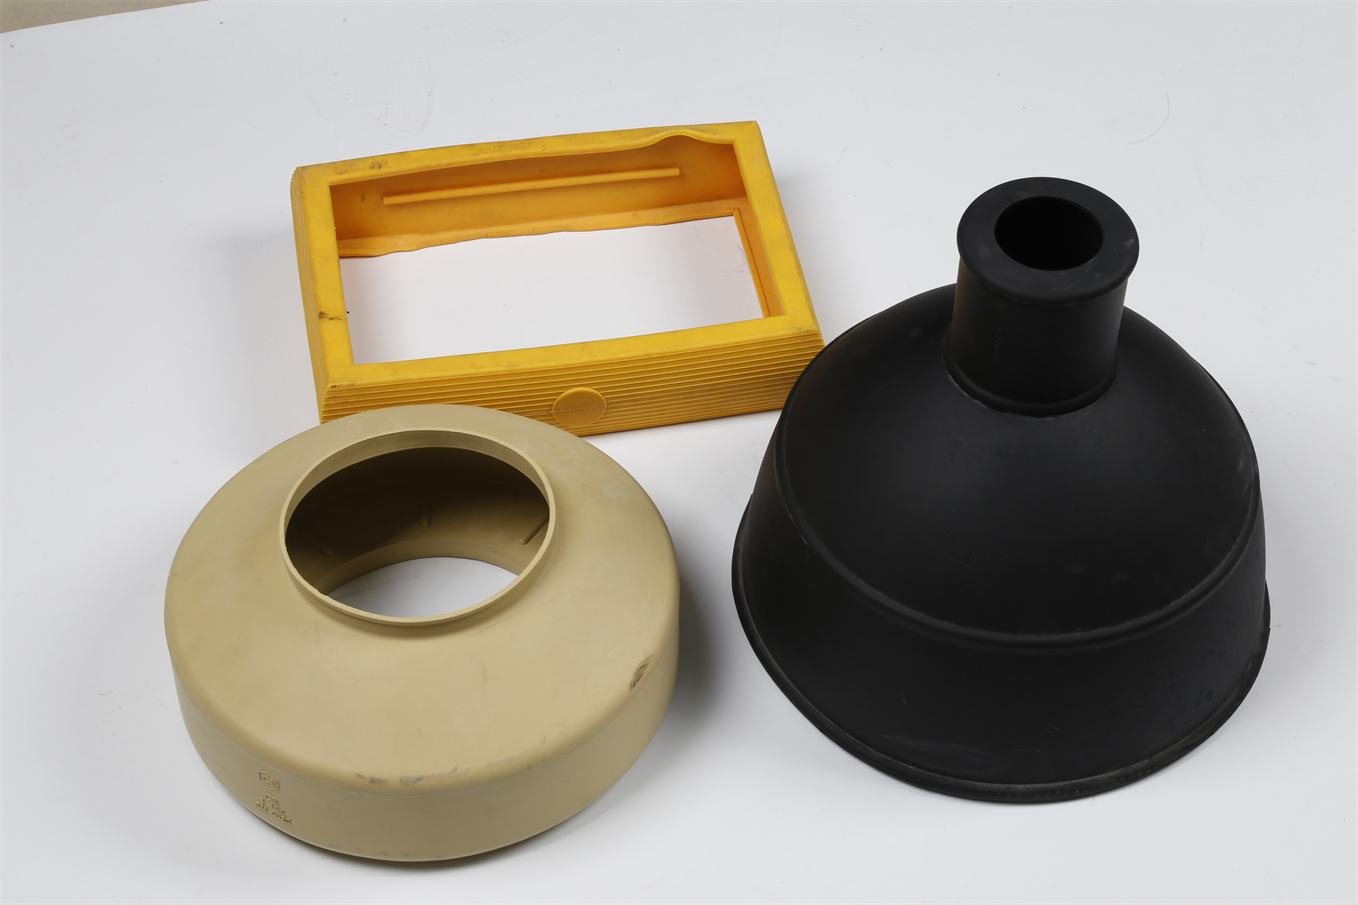 What are the requirements of the silicone seal ring for temperature?